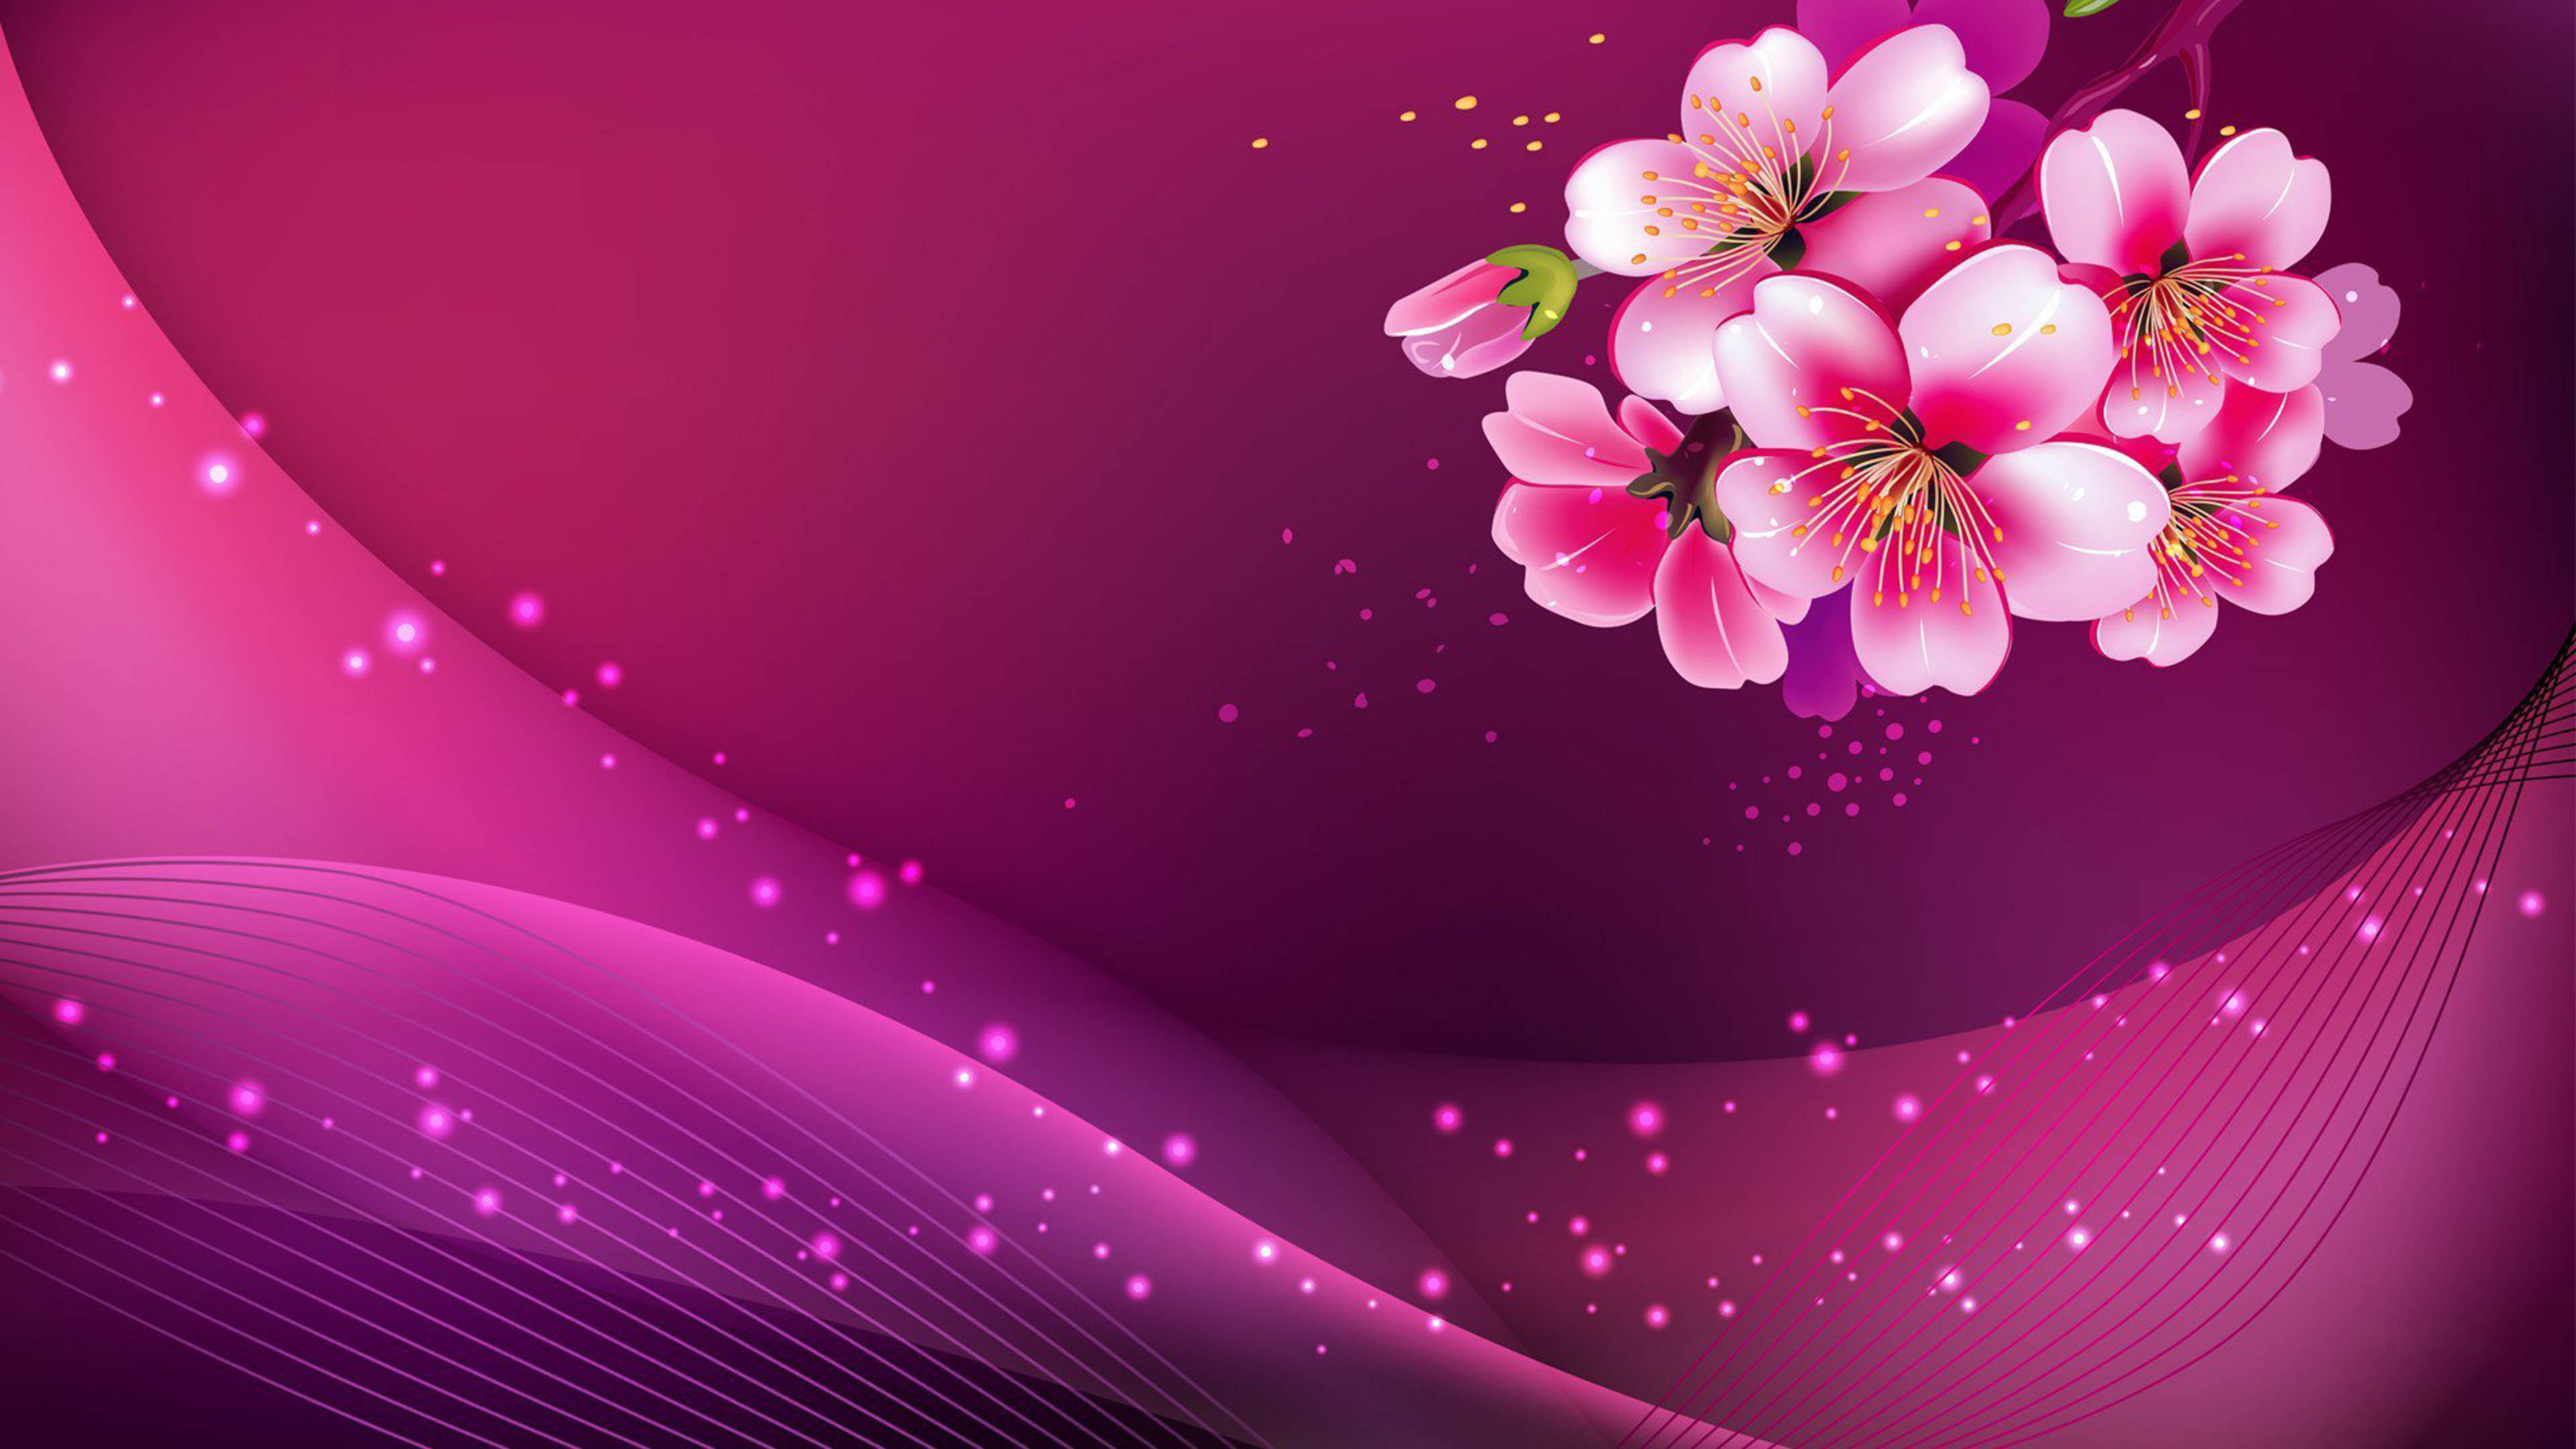 Pink Cherry Blossom And Vector Icons 3d Model Computer Wallpaper Hd :  